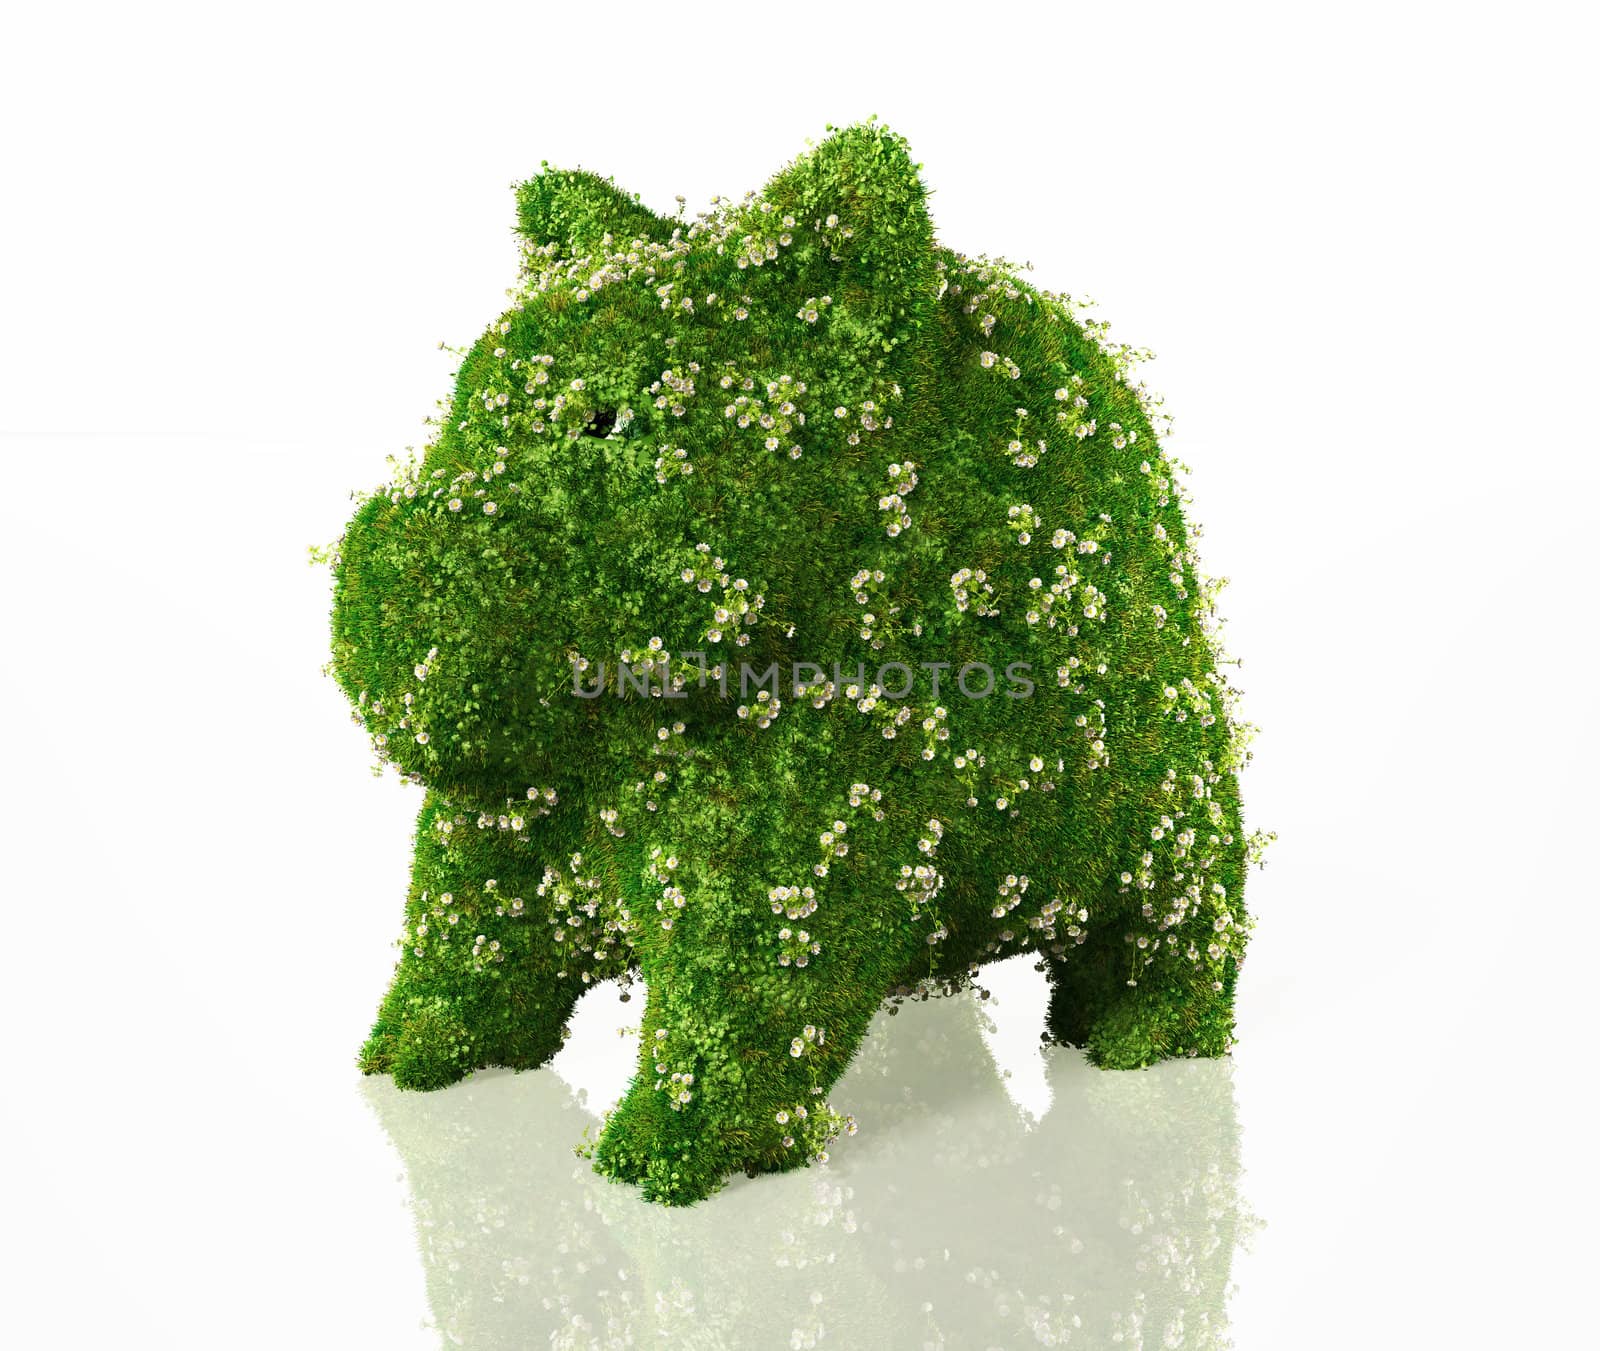 a piggy bank is fully covered except the eyes with grass and flower, on a white background